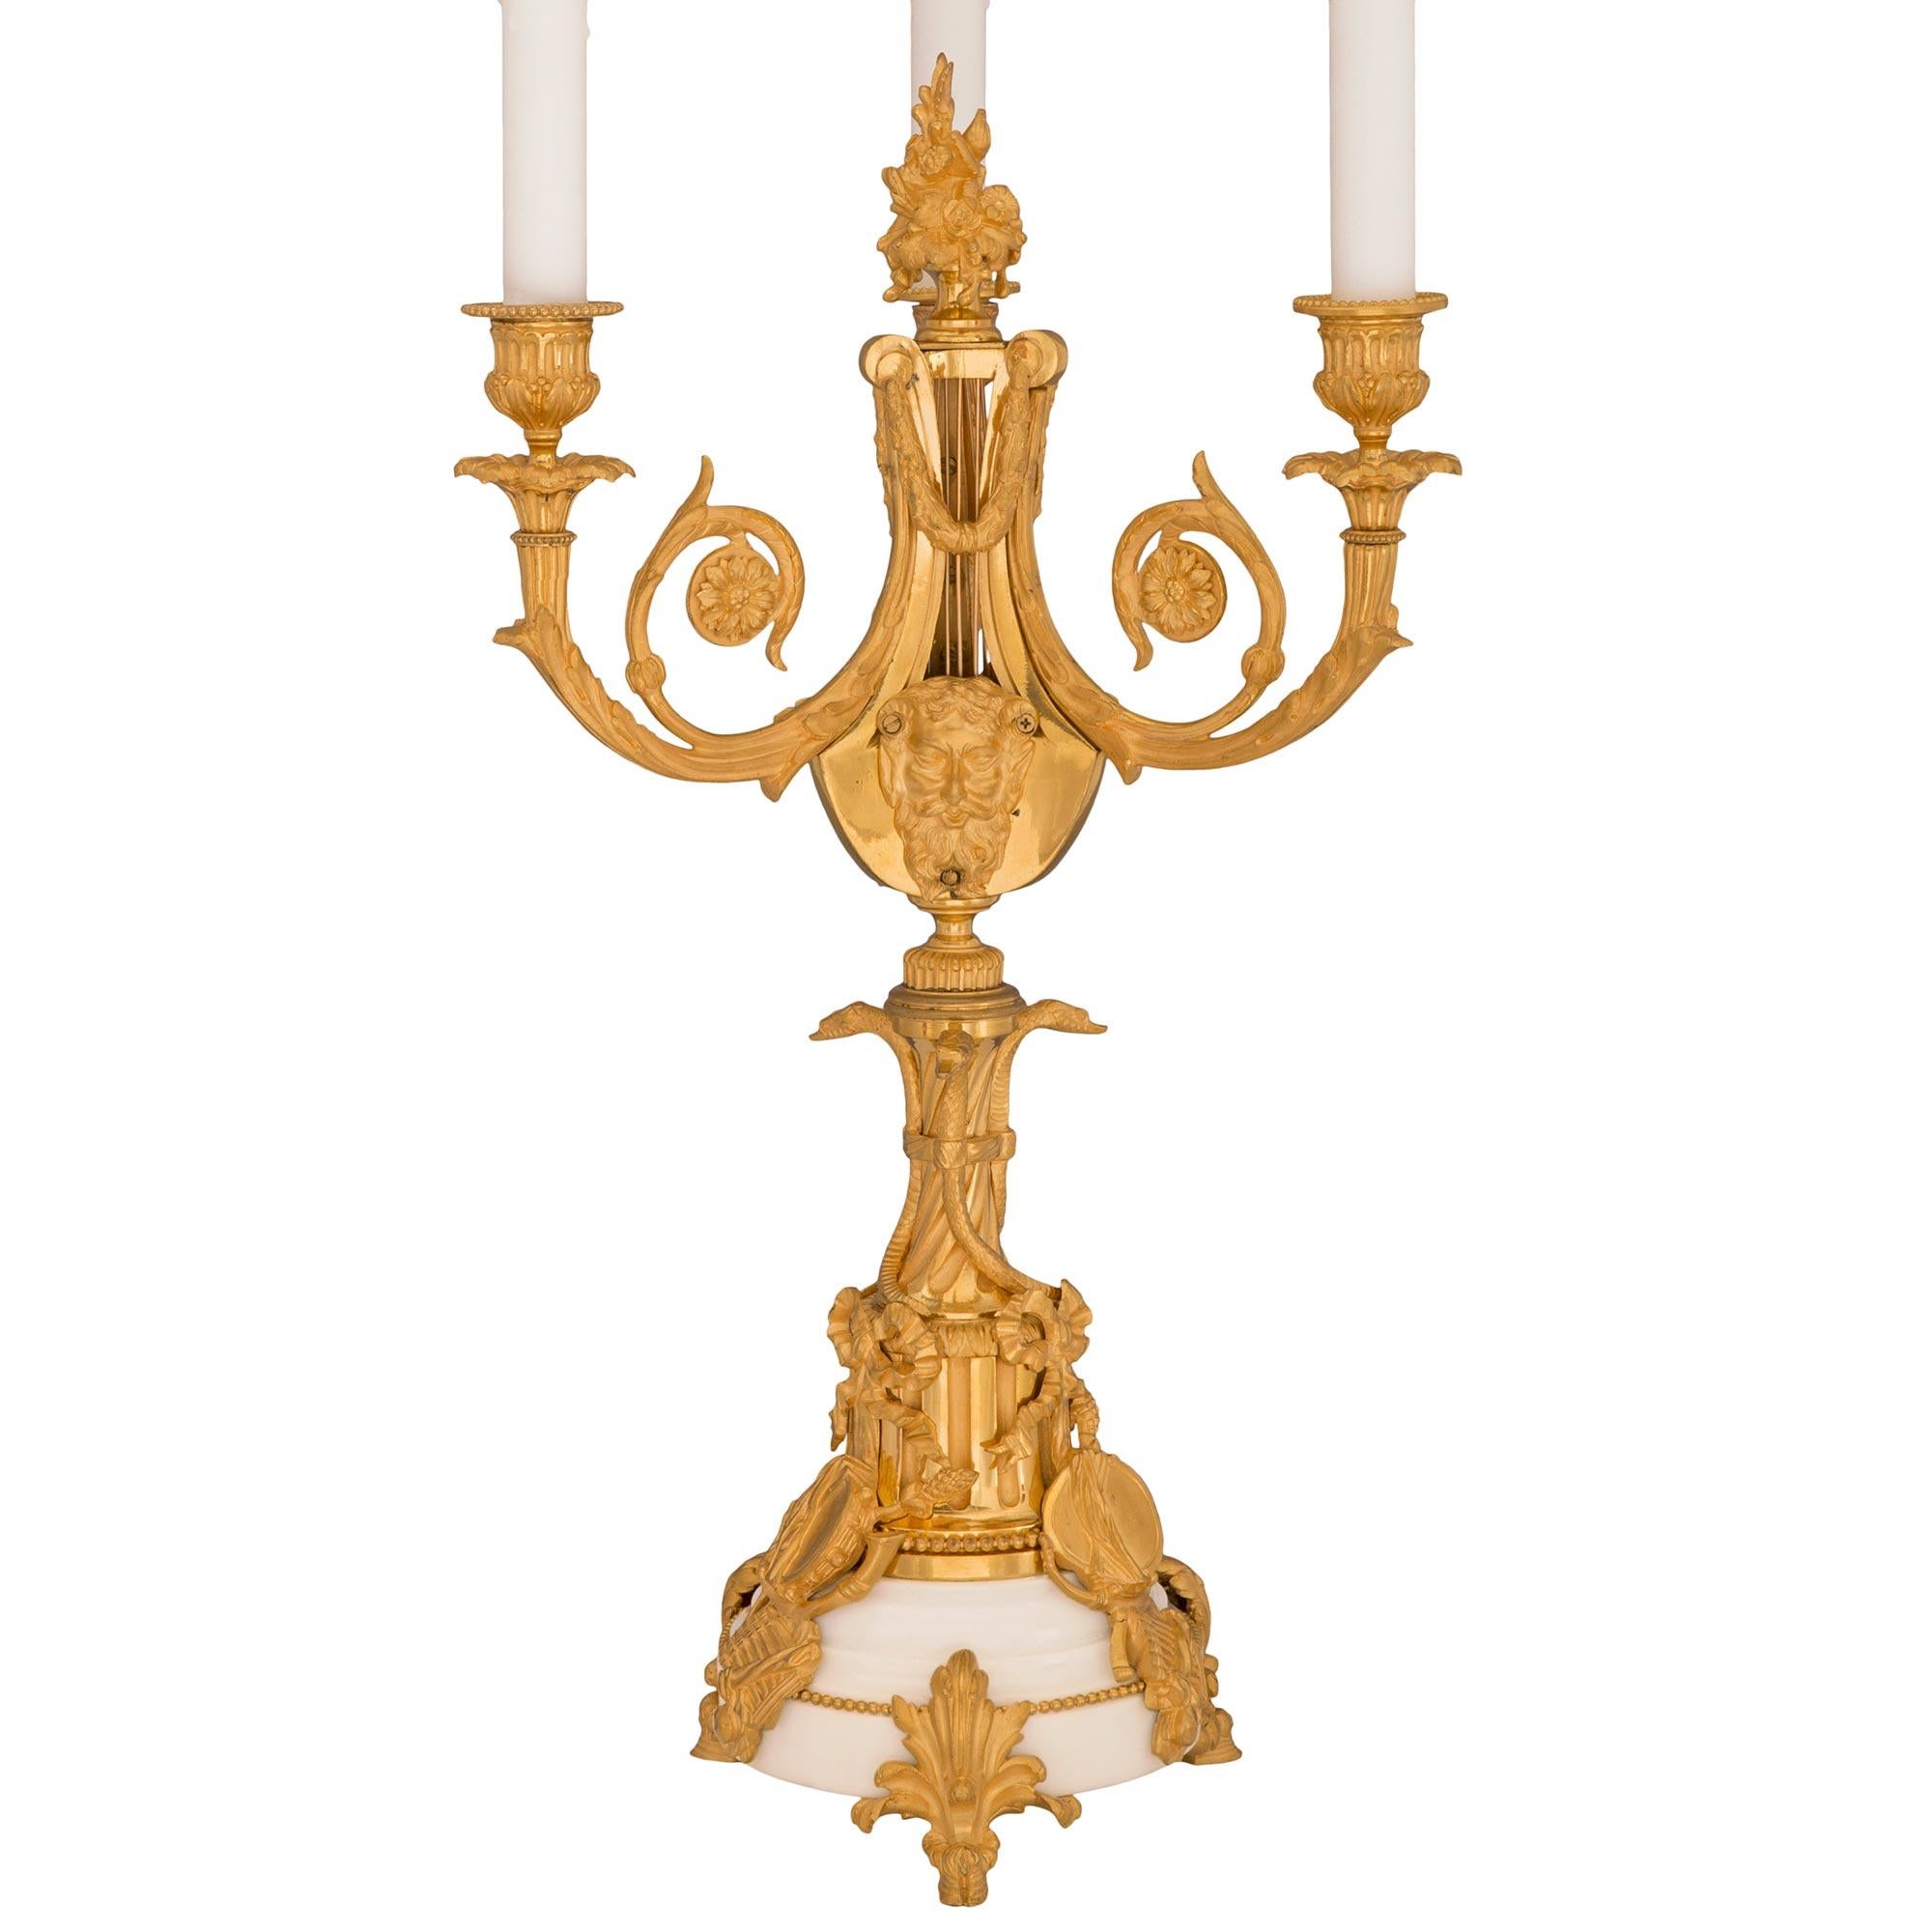 A striking pair of French 19th century Louis XVI st. ormolu and white Carrara marble candelabra lamps. Each three arm lamp is raised by an elegant circular stepped white Carrara marble base and striking hoof feet with richly chased scrolled acanthus